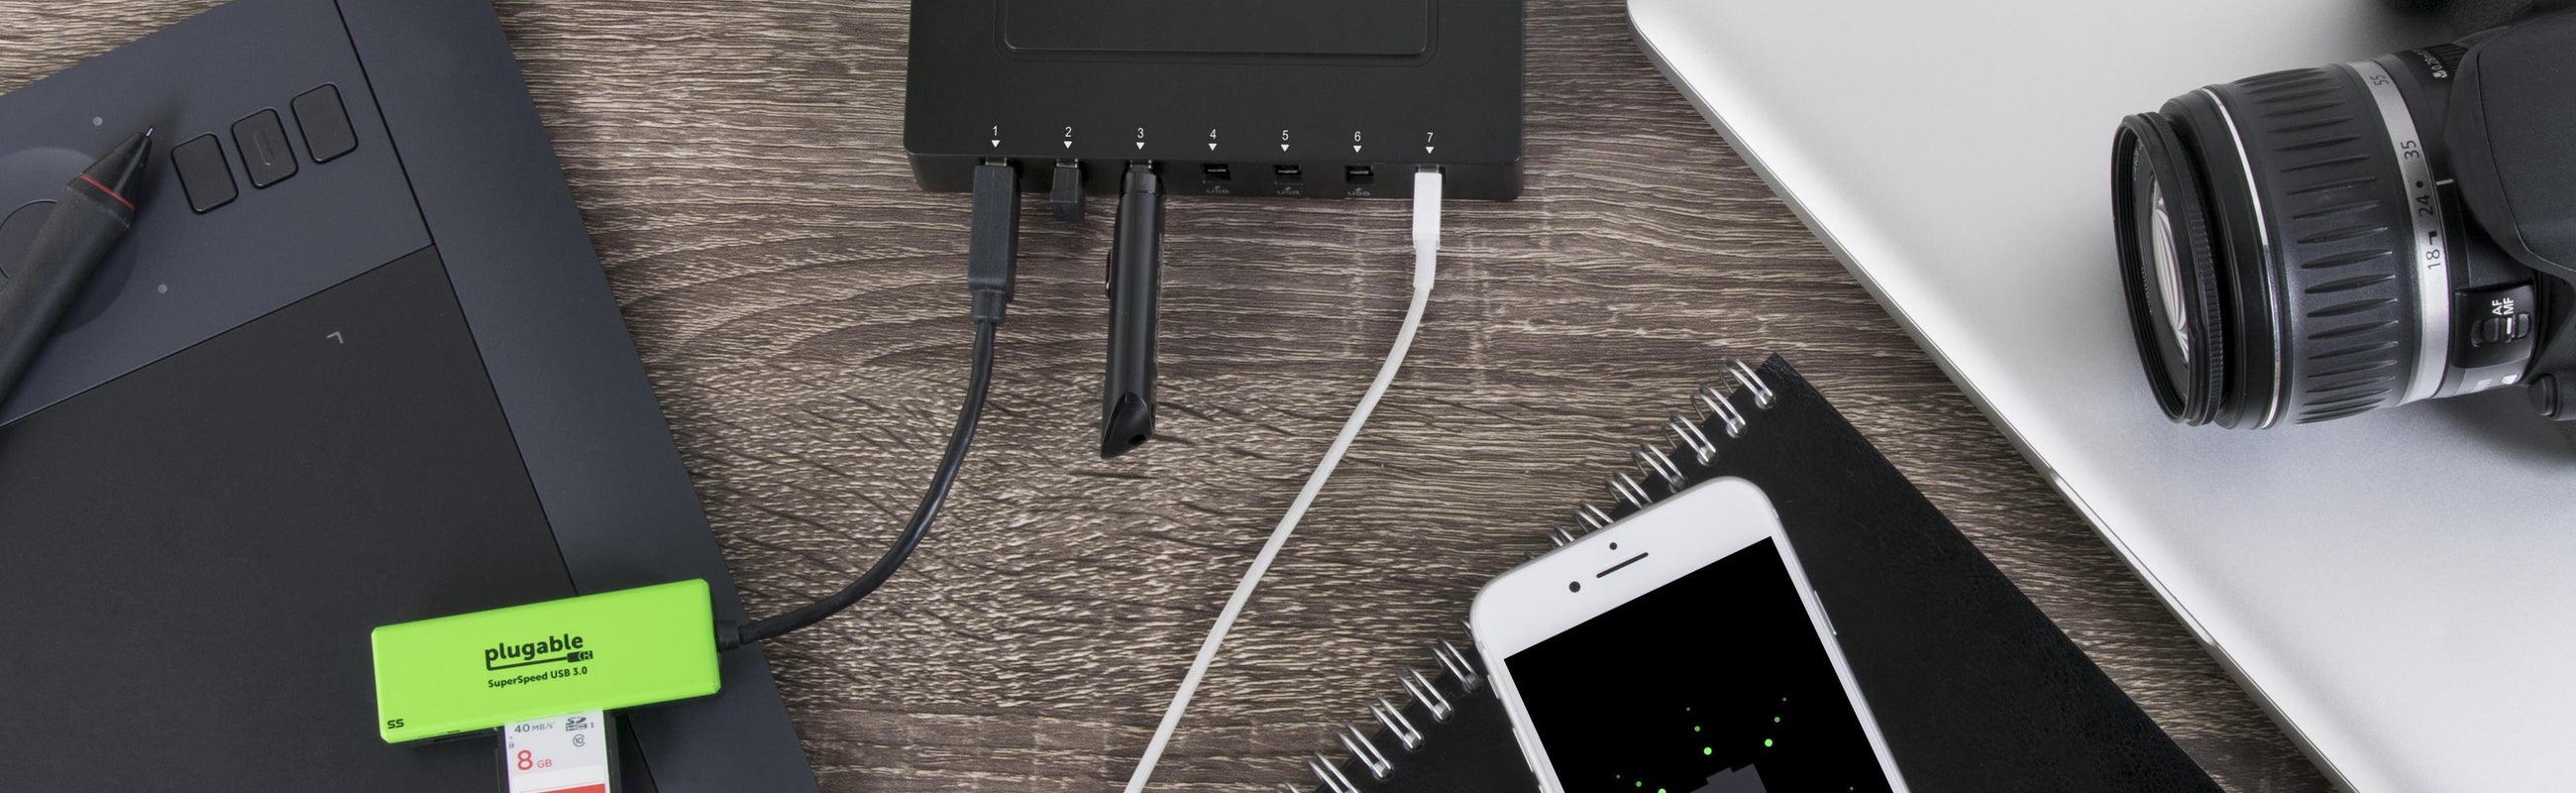 Plugable USB2-HUB7BC with multiple devices plugged in